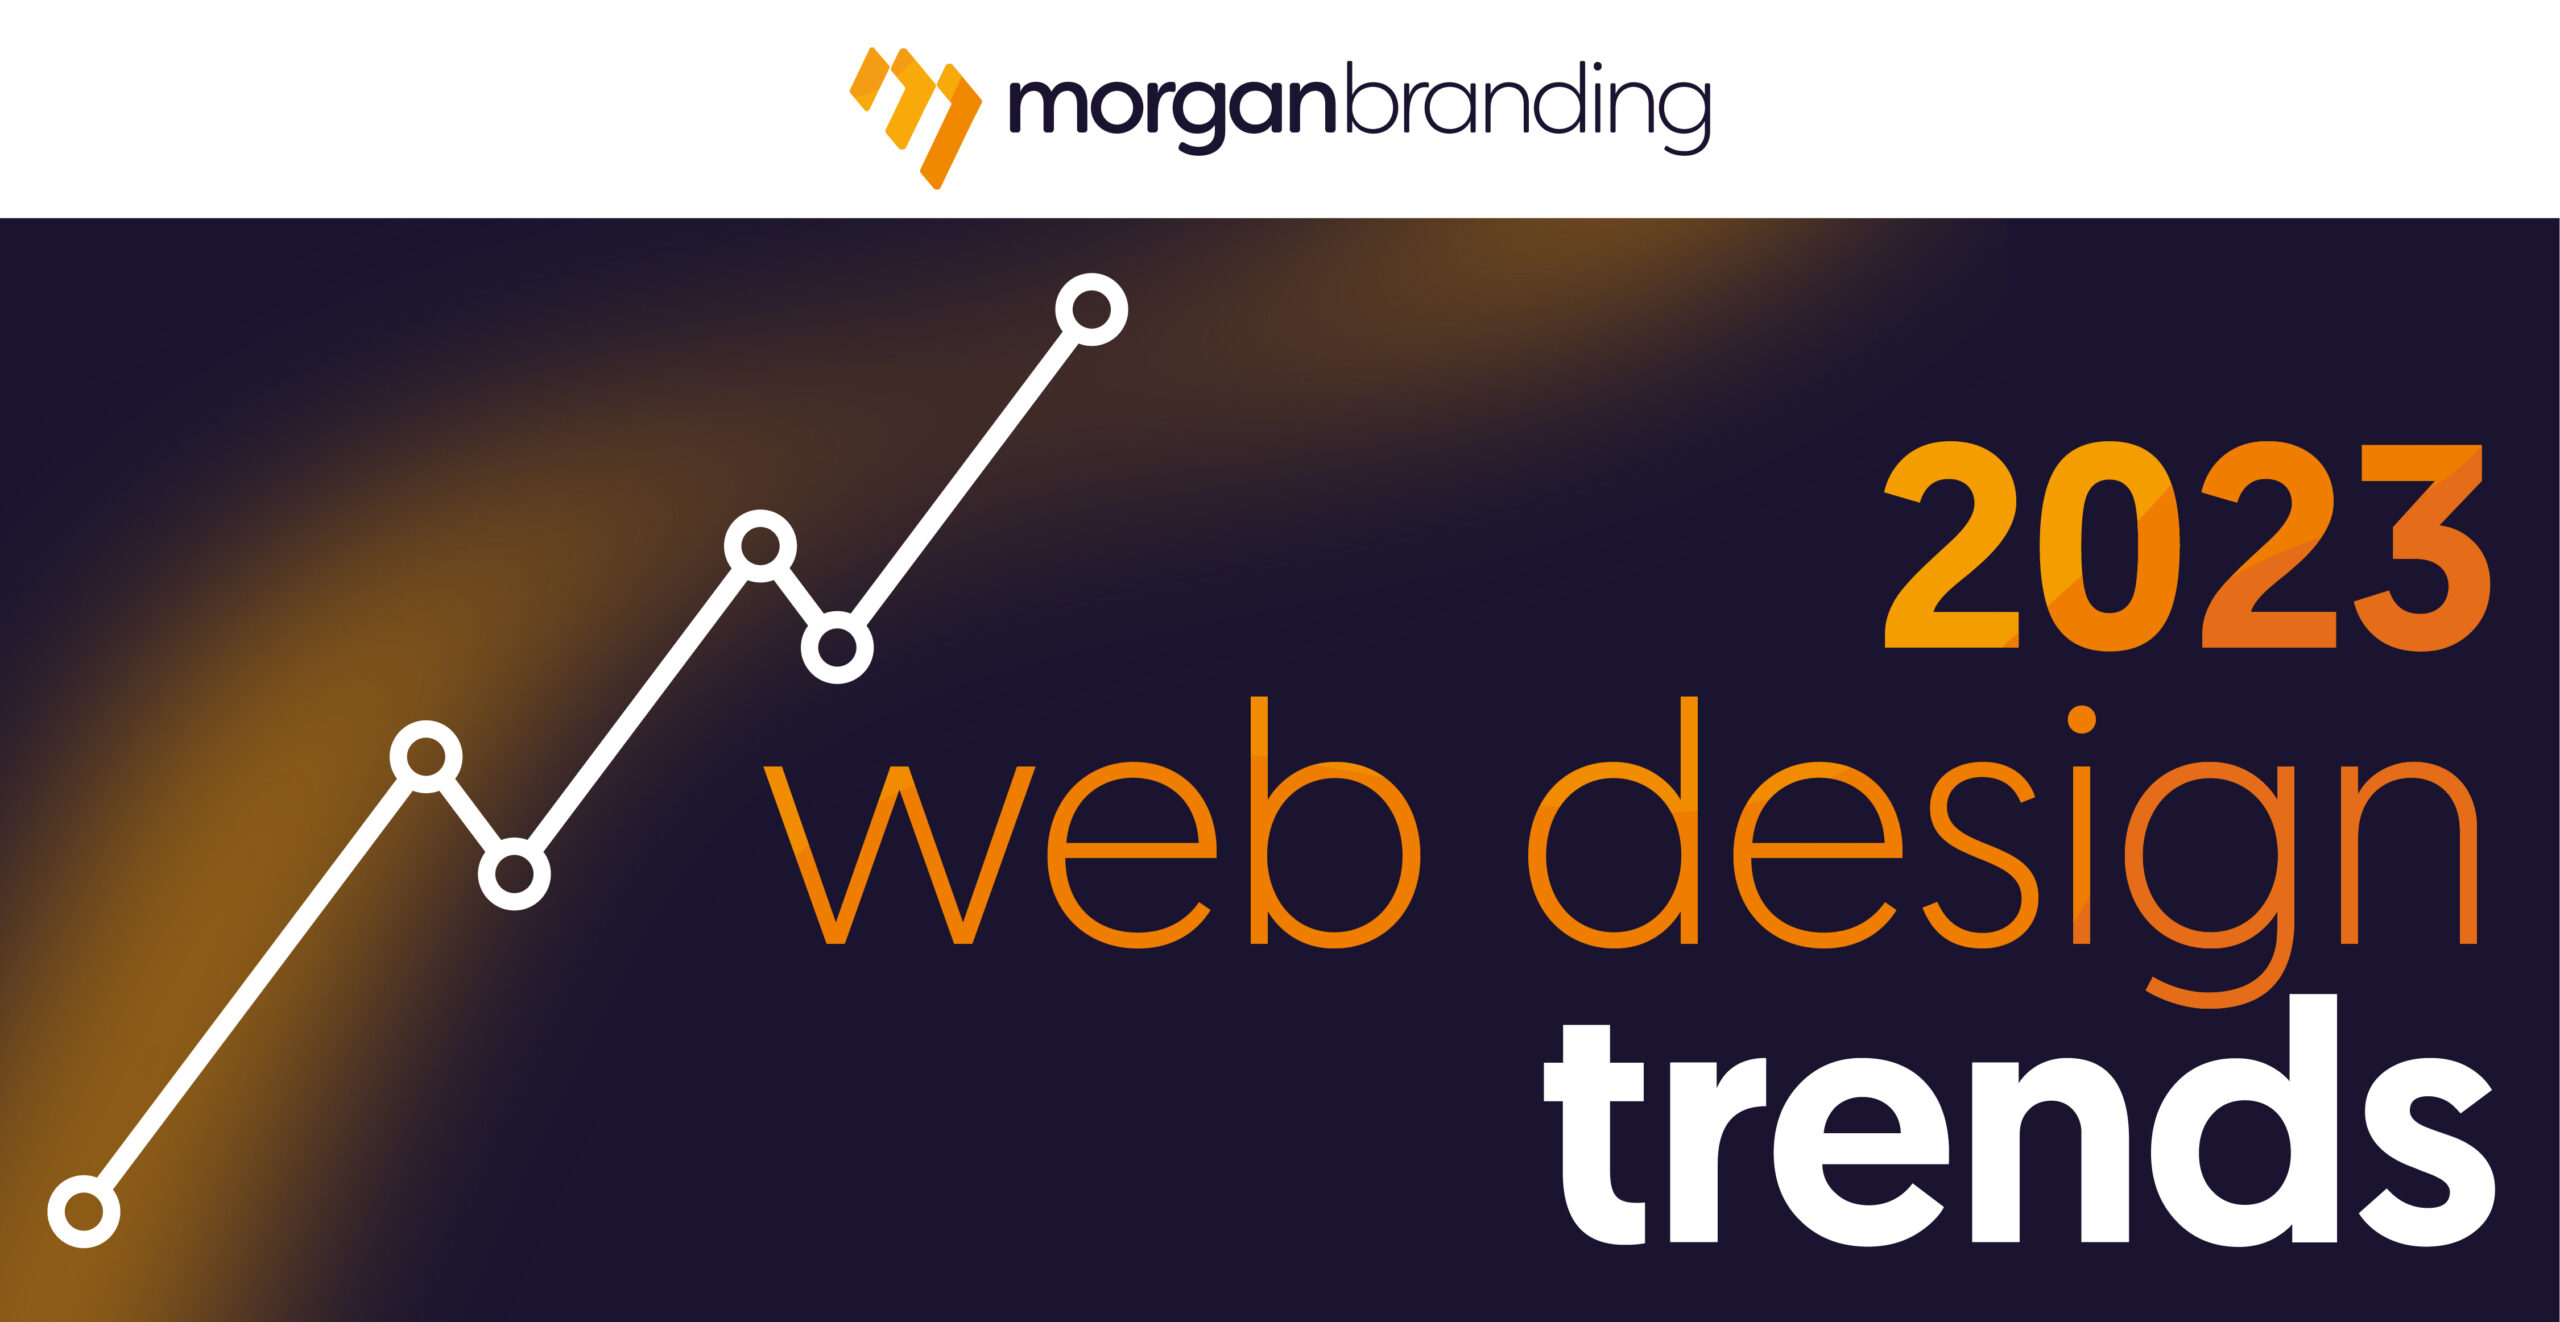 Website trends and predictions 2023